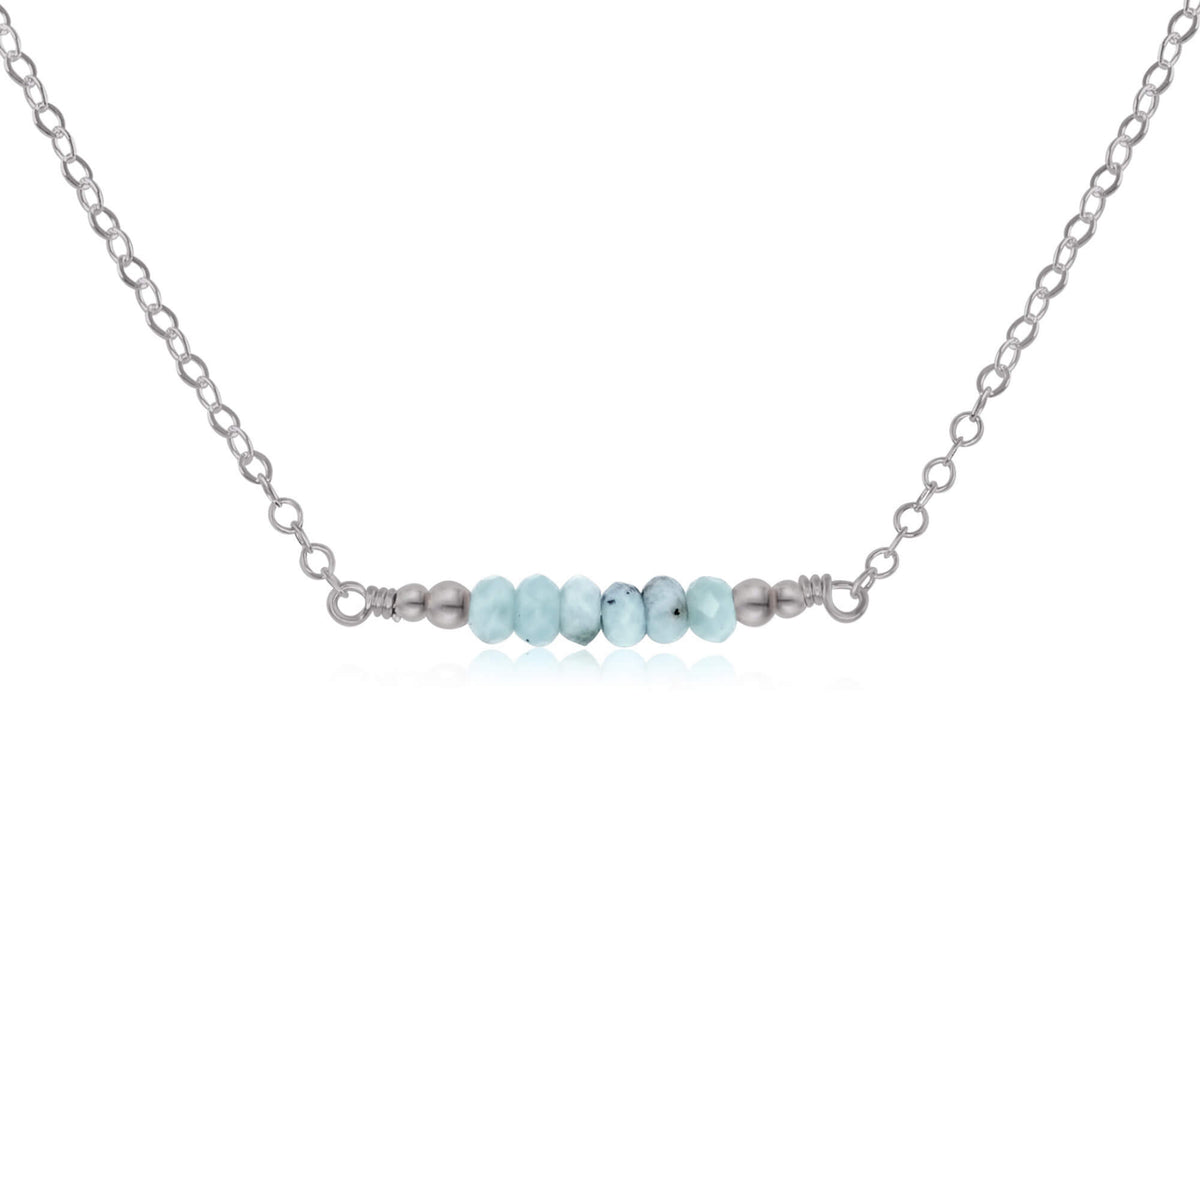 Faceted Bead Bar Necklace - Larimar - Stainless Steel - Luna Tide Handmade Jewellery